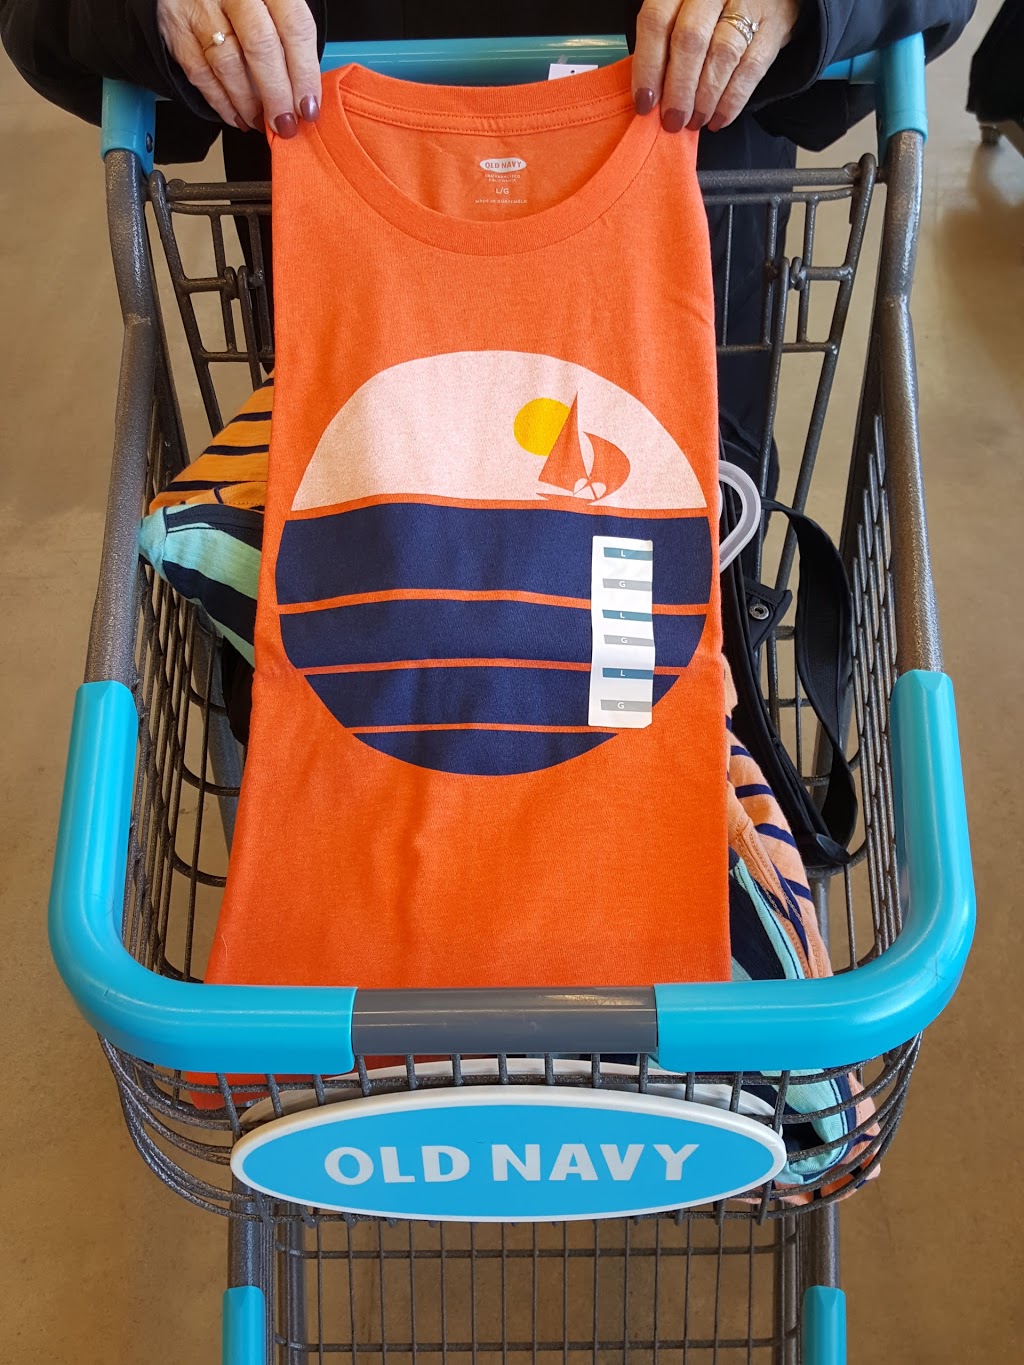 Old Navy - with Curbside Pickup | 1420 S Holland Sylvania Rd, Holland, OH 43528 | Phone: (419) 491-4644